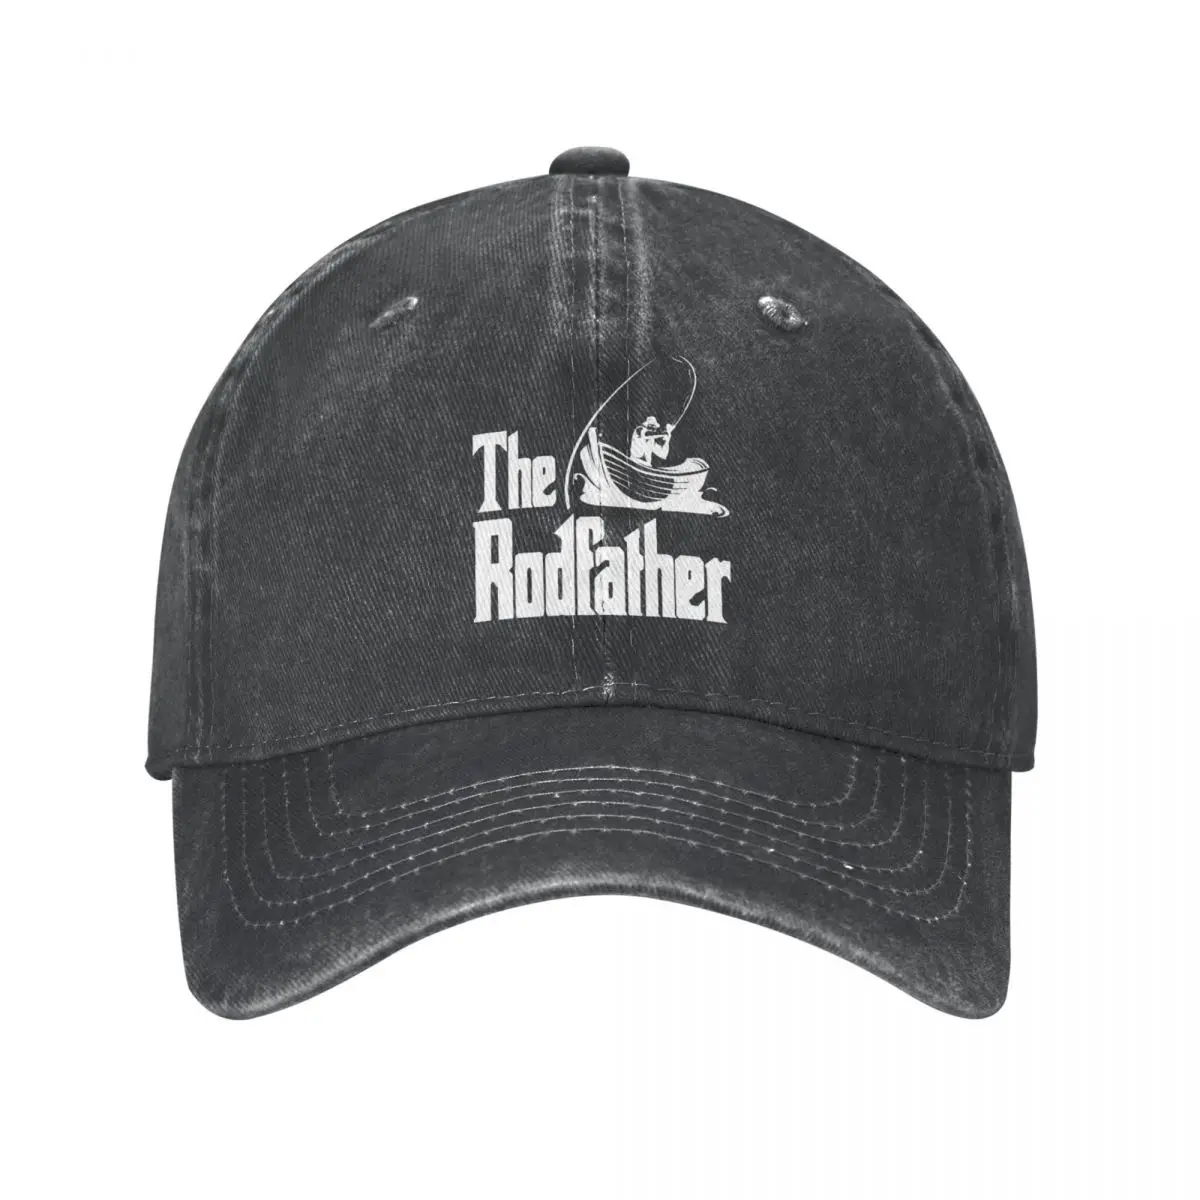 

The Rodfather Baseball Caps Vintage Washed Ice Fly Bass Fishing Fisher Sun Cap Outdoor Workouts Unstructured Soft Hats Cap